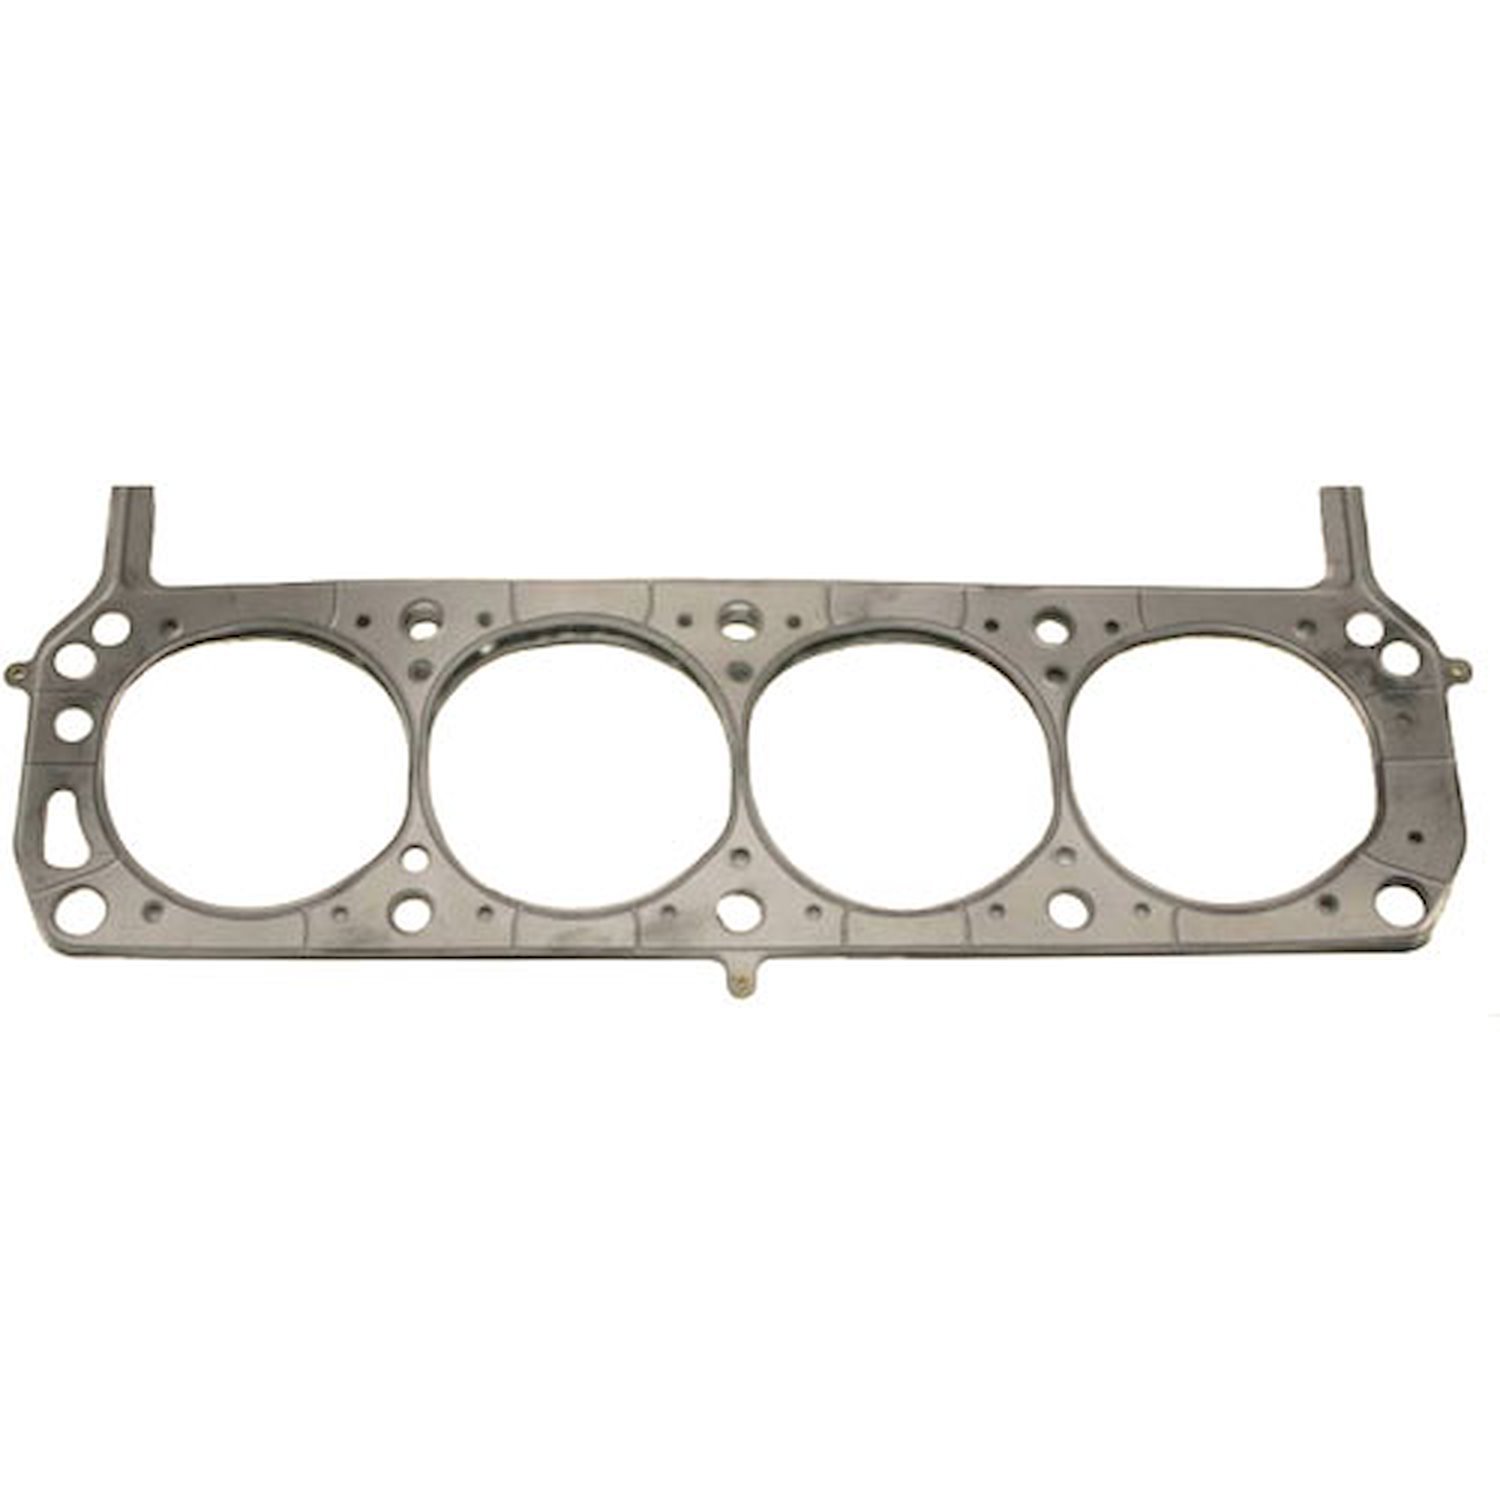 Small-Block Ford Head Gasket 302, 351W SVO w/ Valve Pockets, Yates Style, Right Side